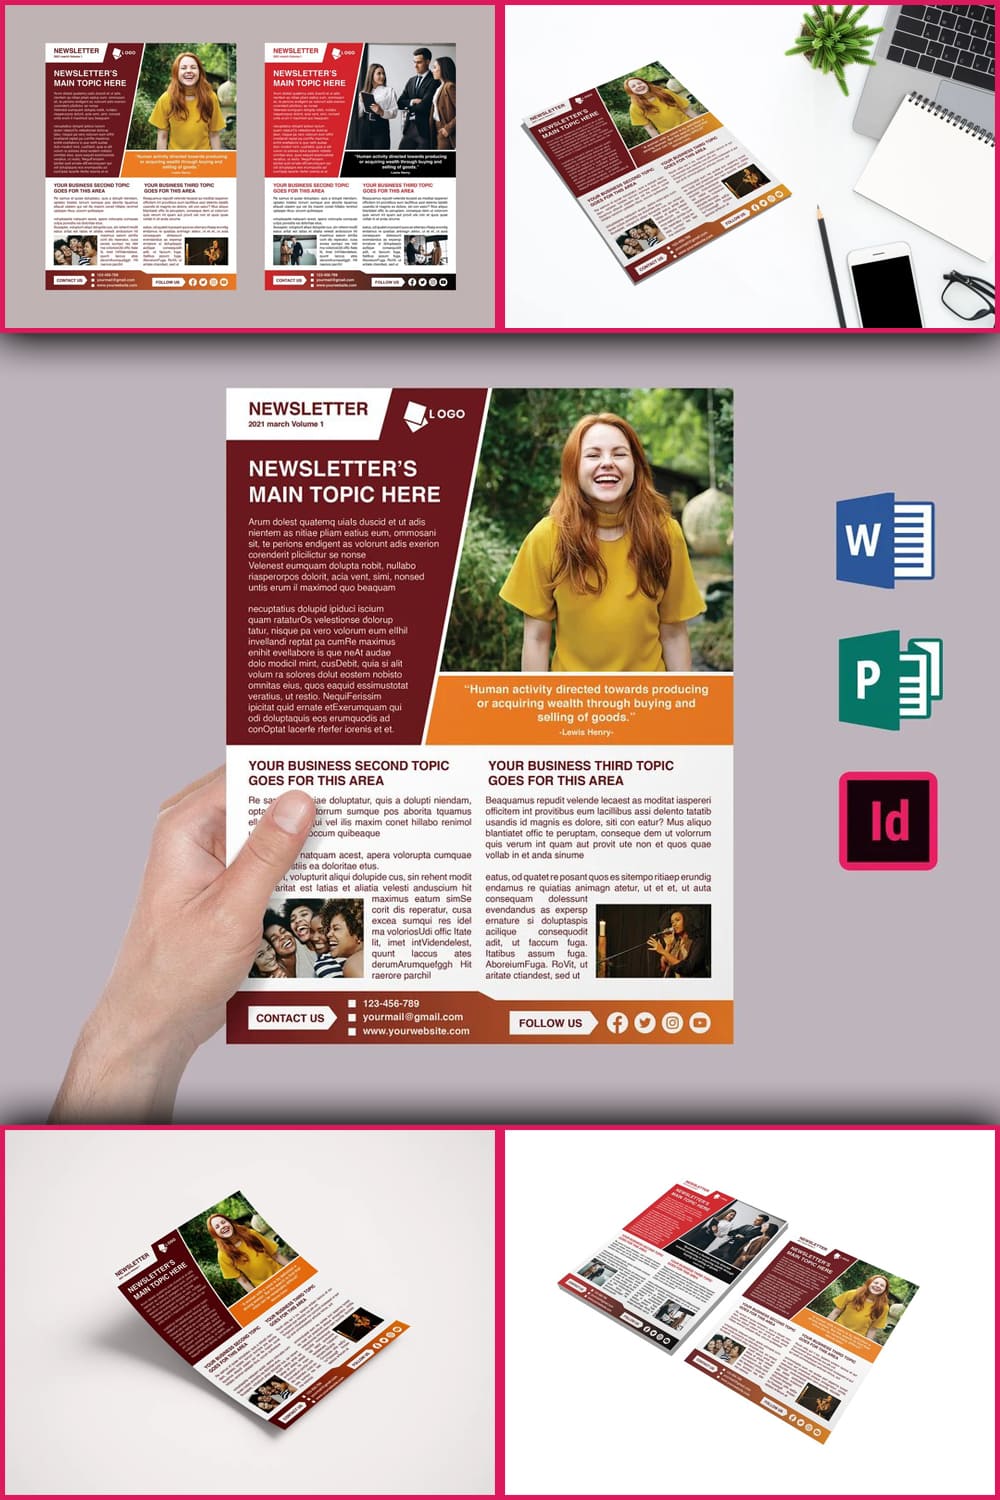 A selection of beautiful images of the newsletter template.